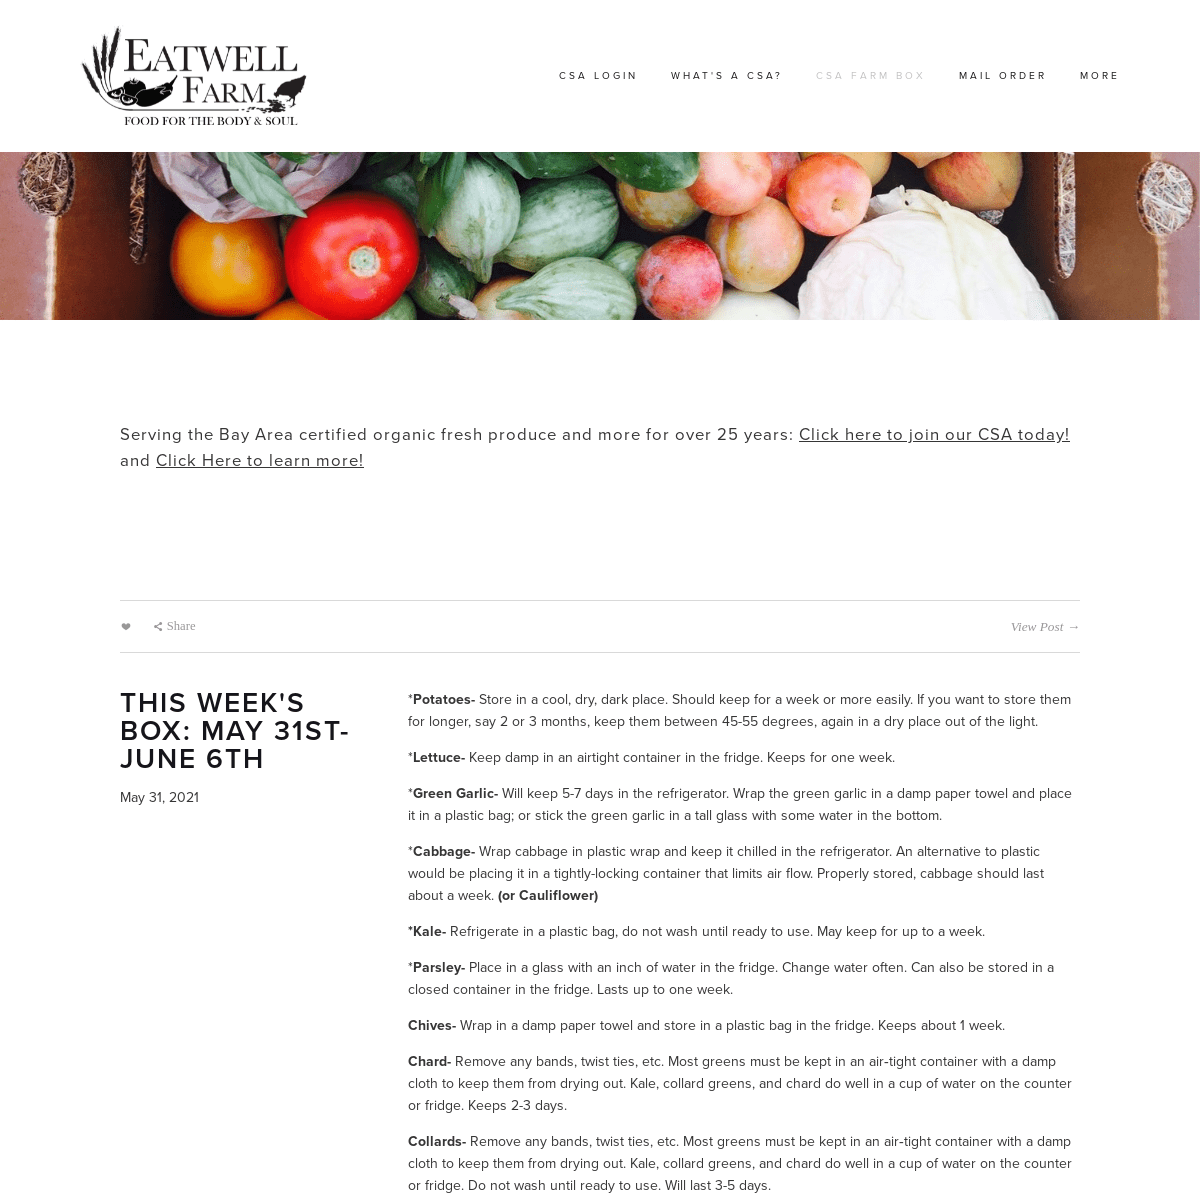 A complete backup of https://eatwell.com